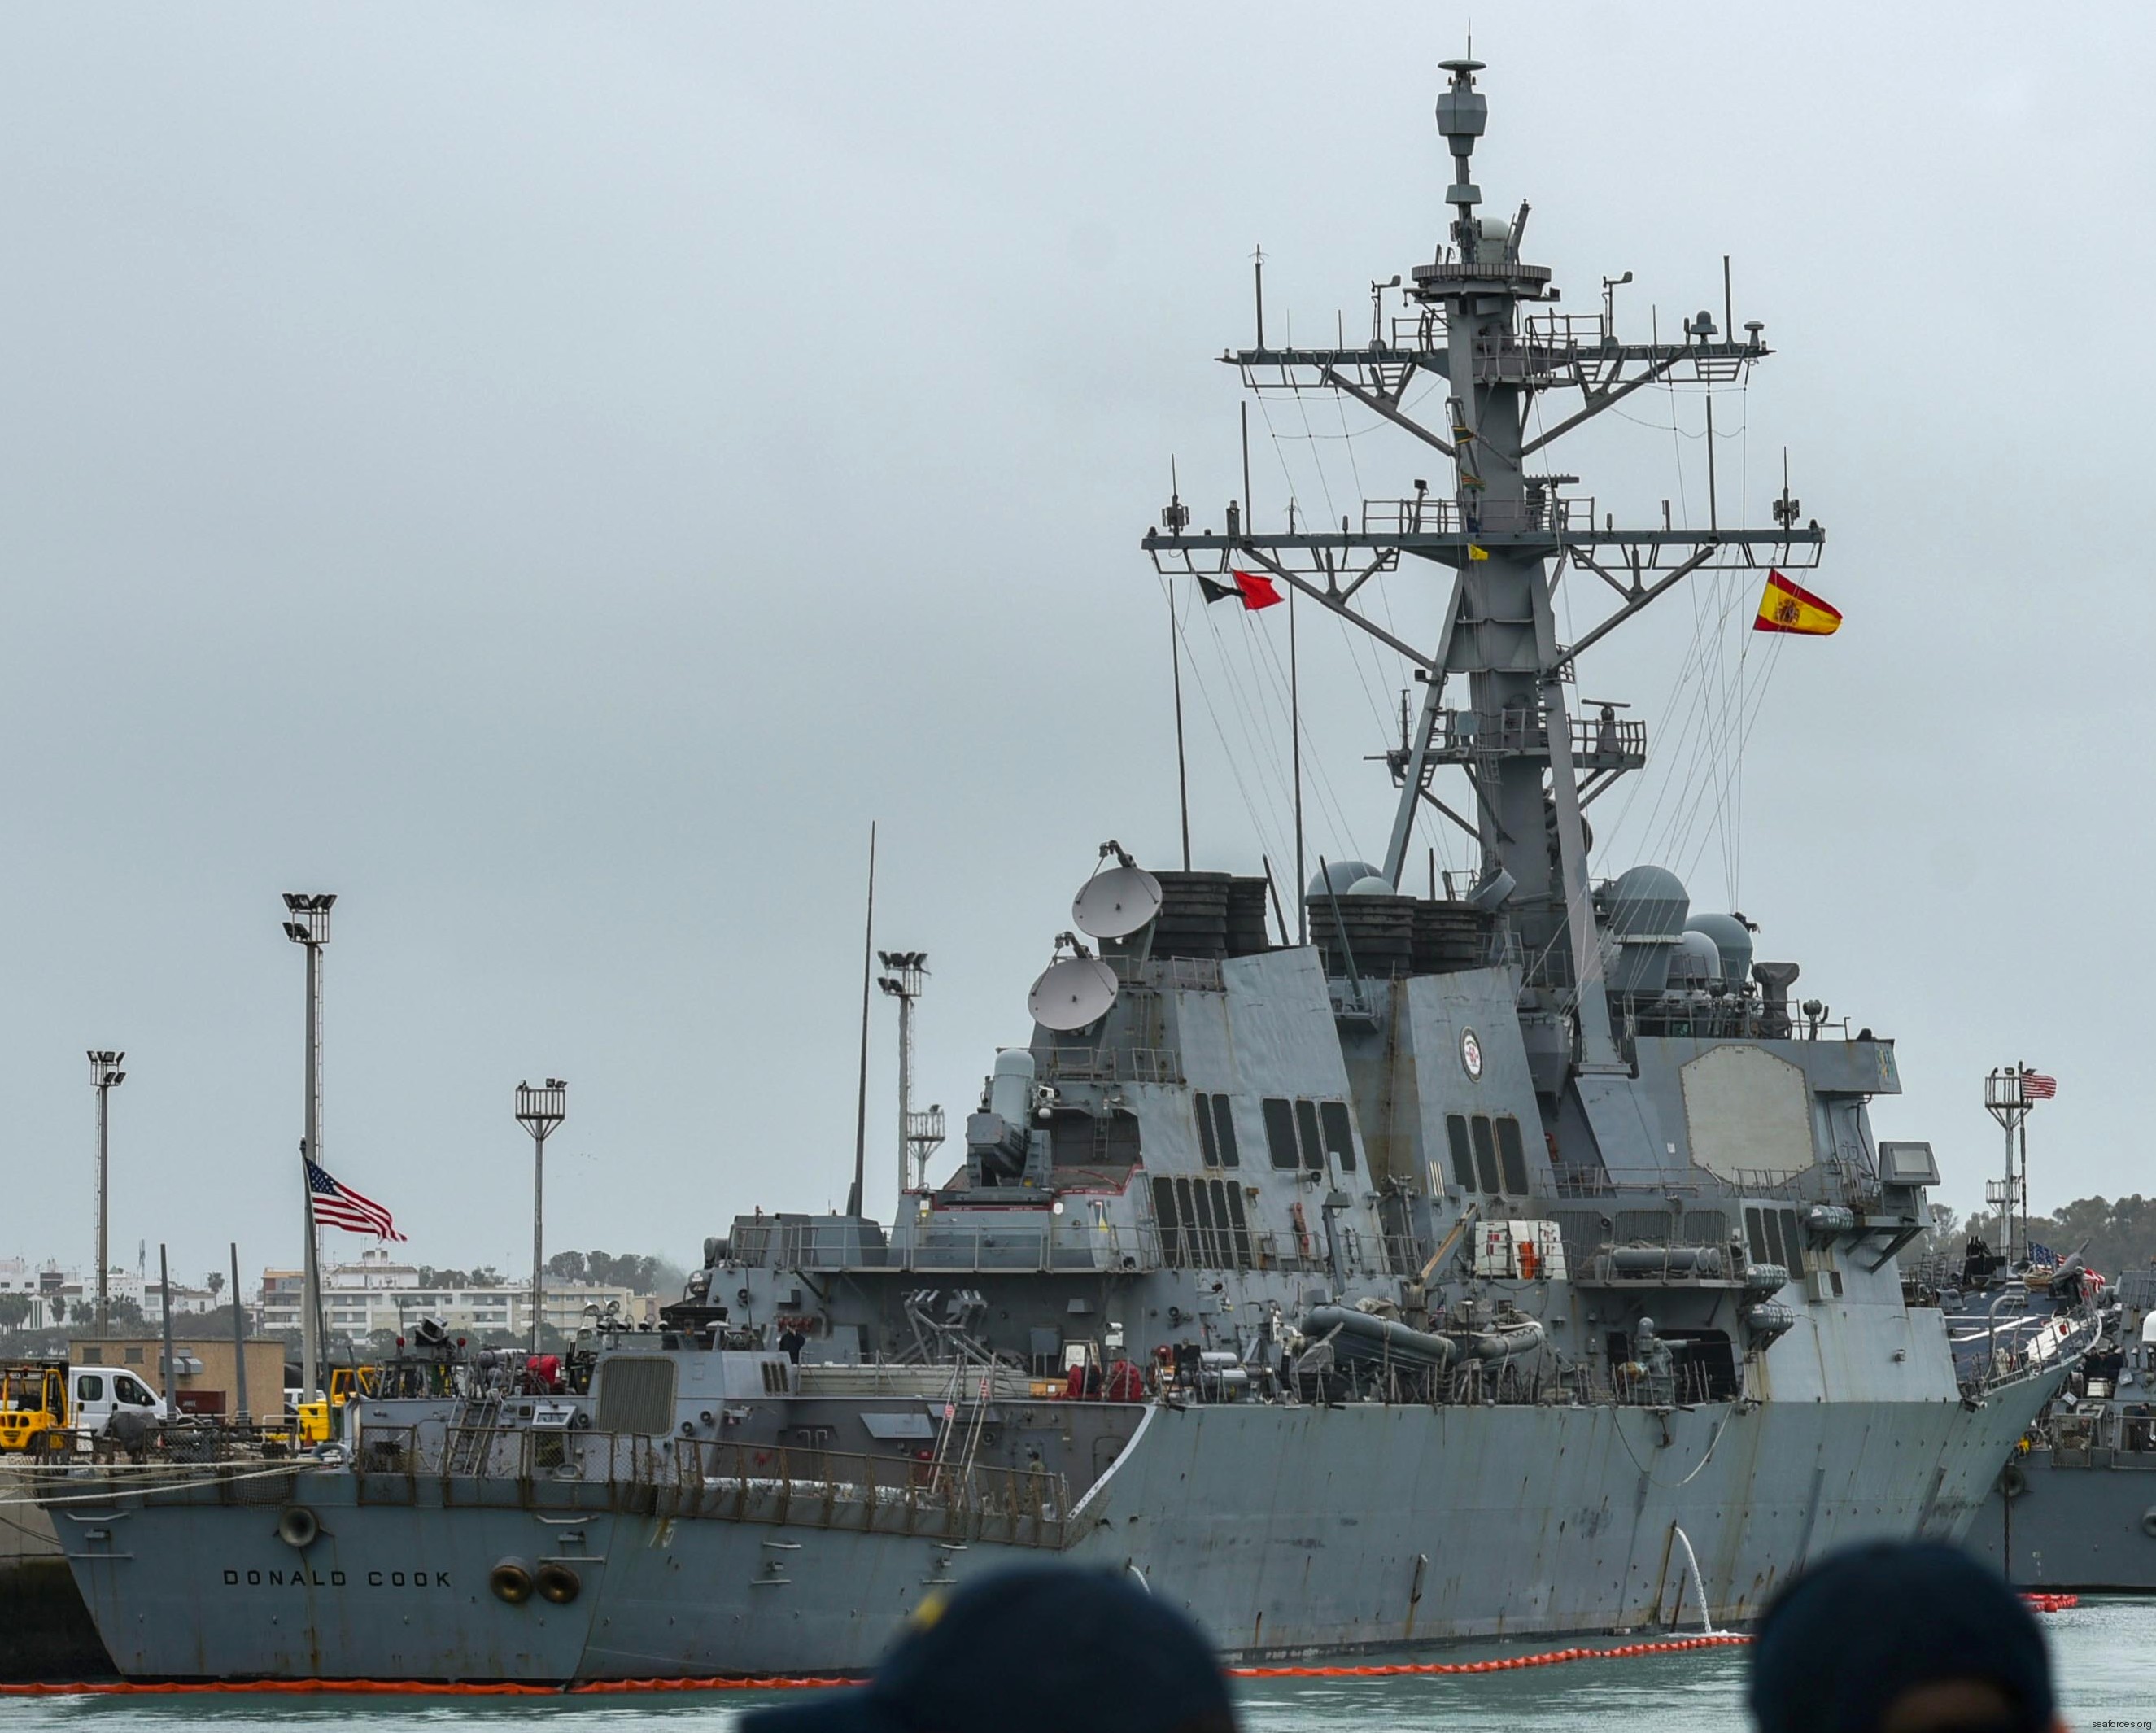 ddg-75 uss donald cook guided missile destroyer arleigh burke class aegis 168 naval station rota spain